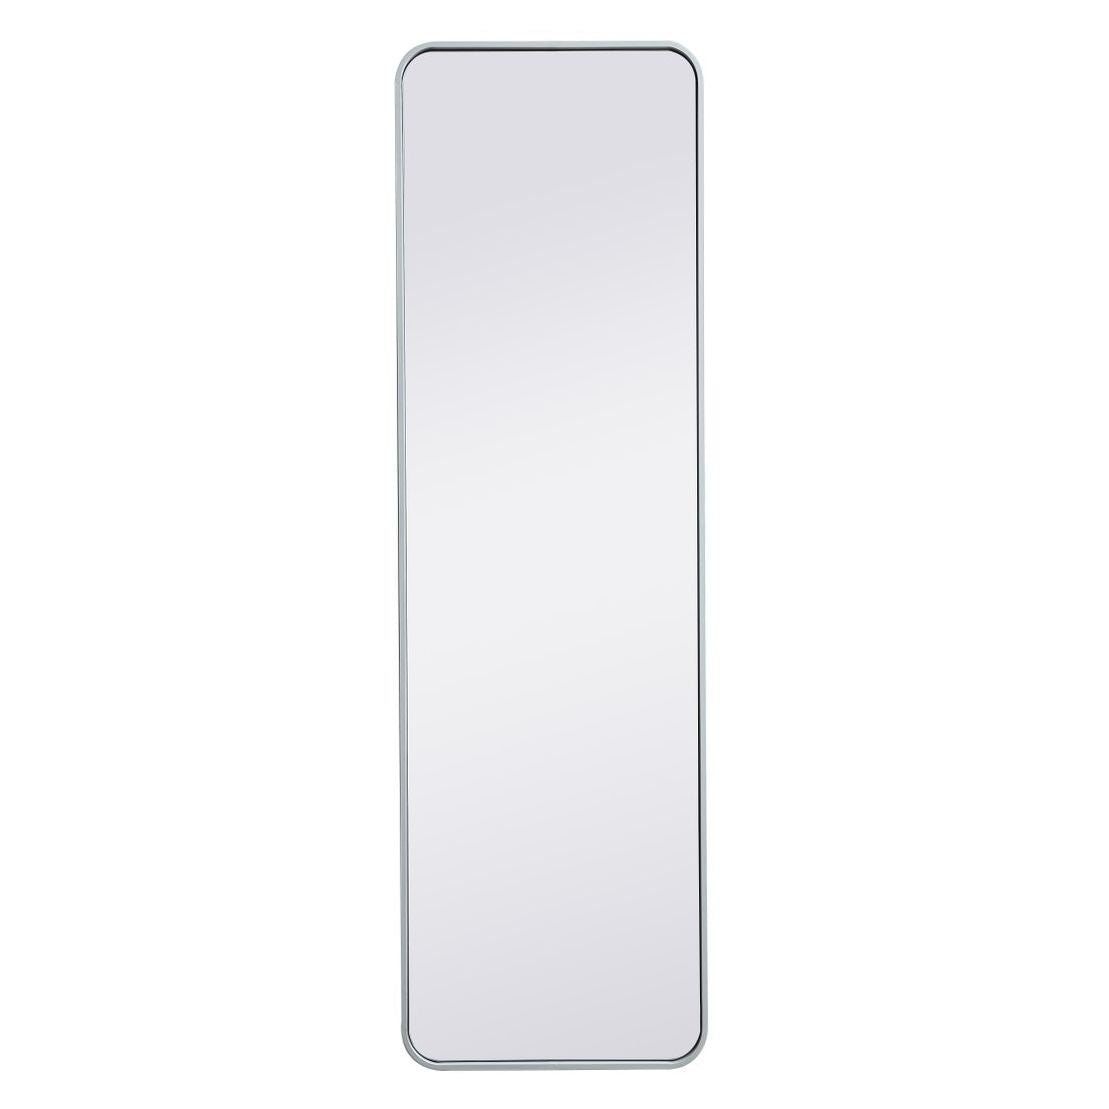 MR801860WH Evermore 18" x 60" Metal Framed Rectangular Mirror in White